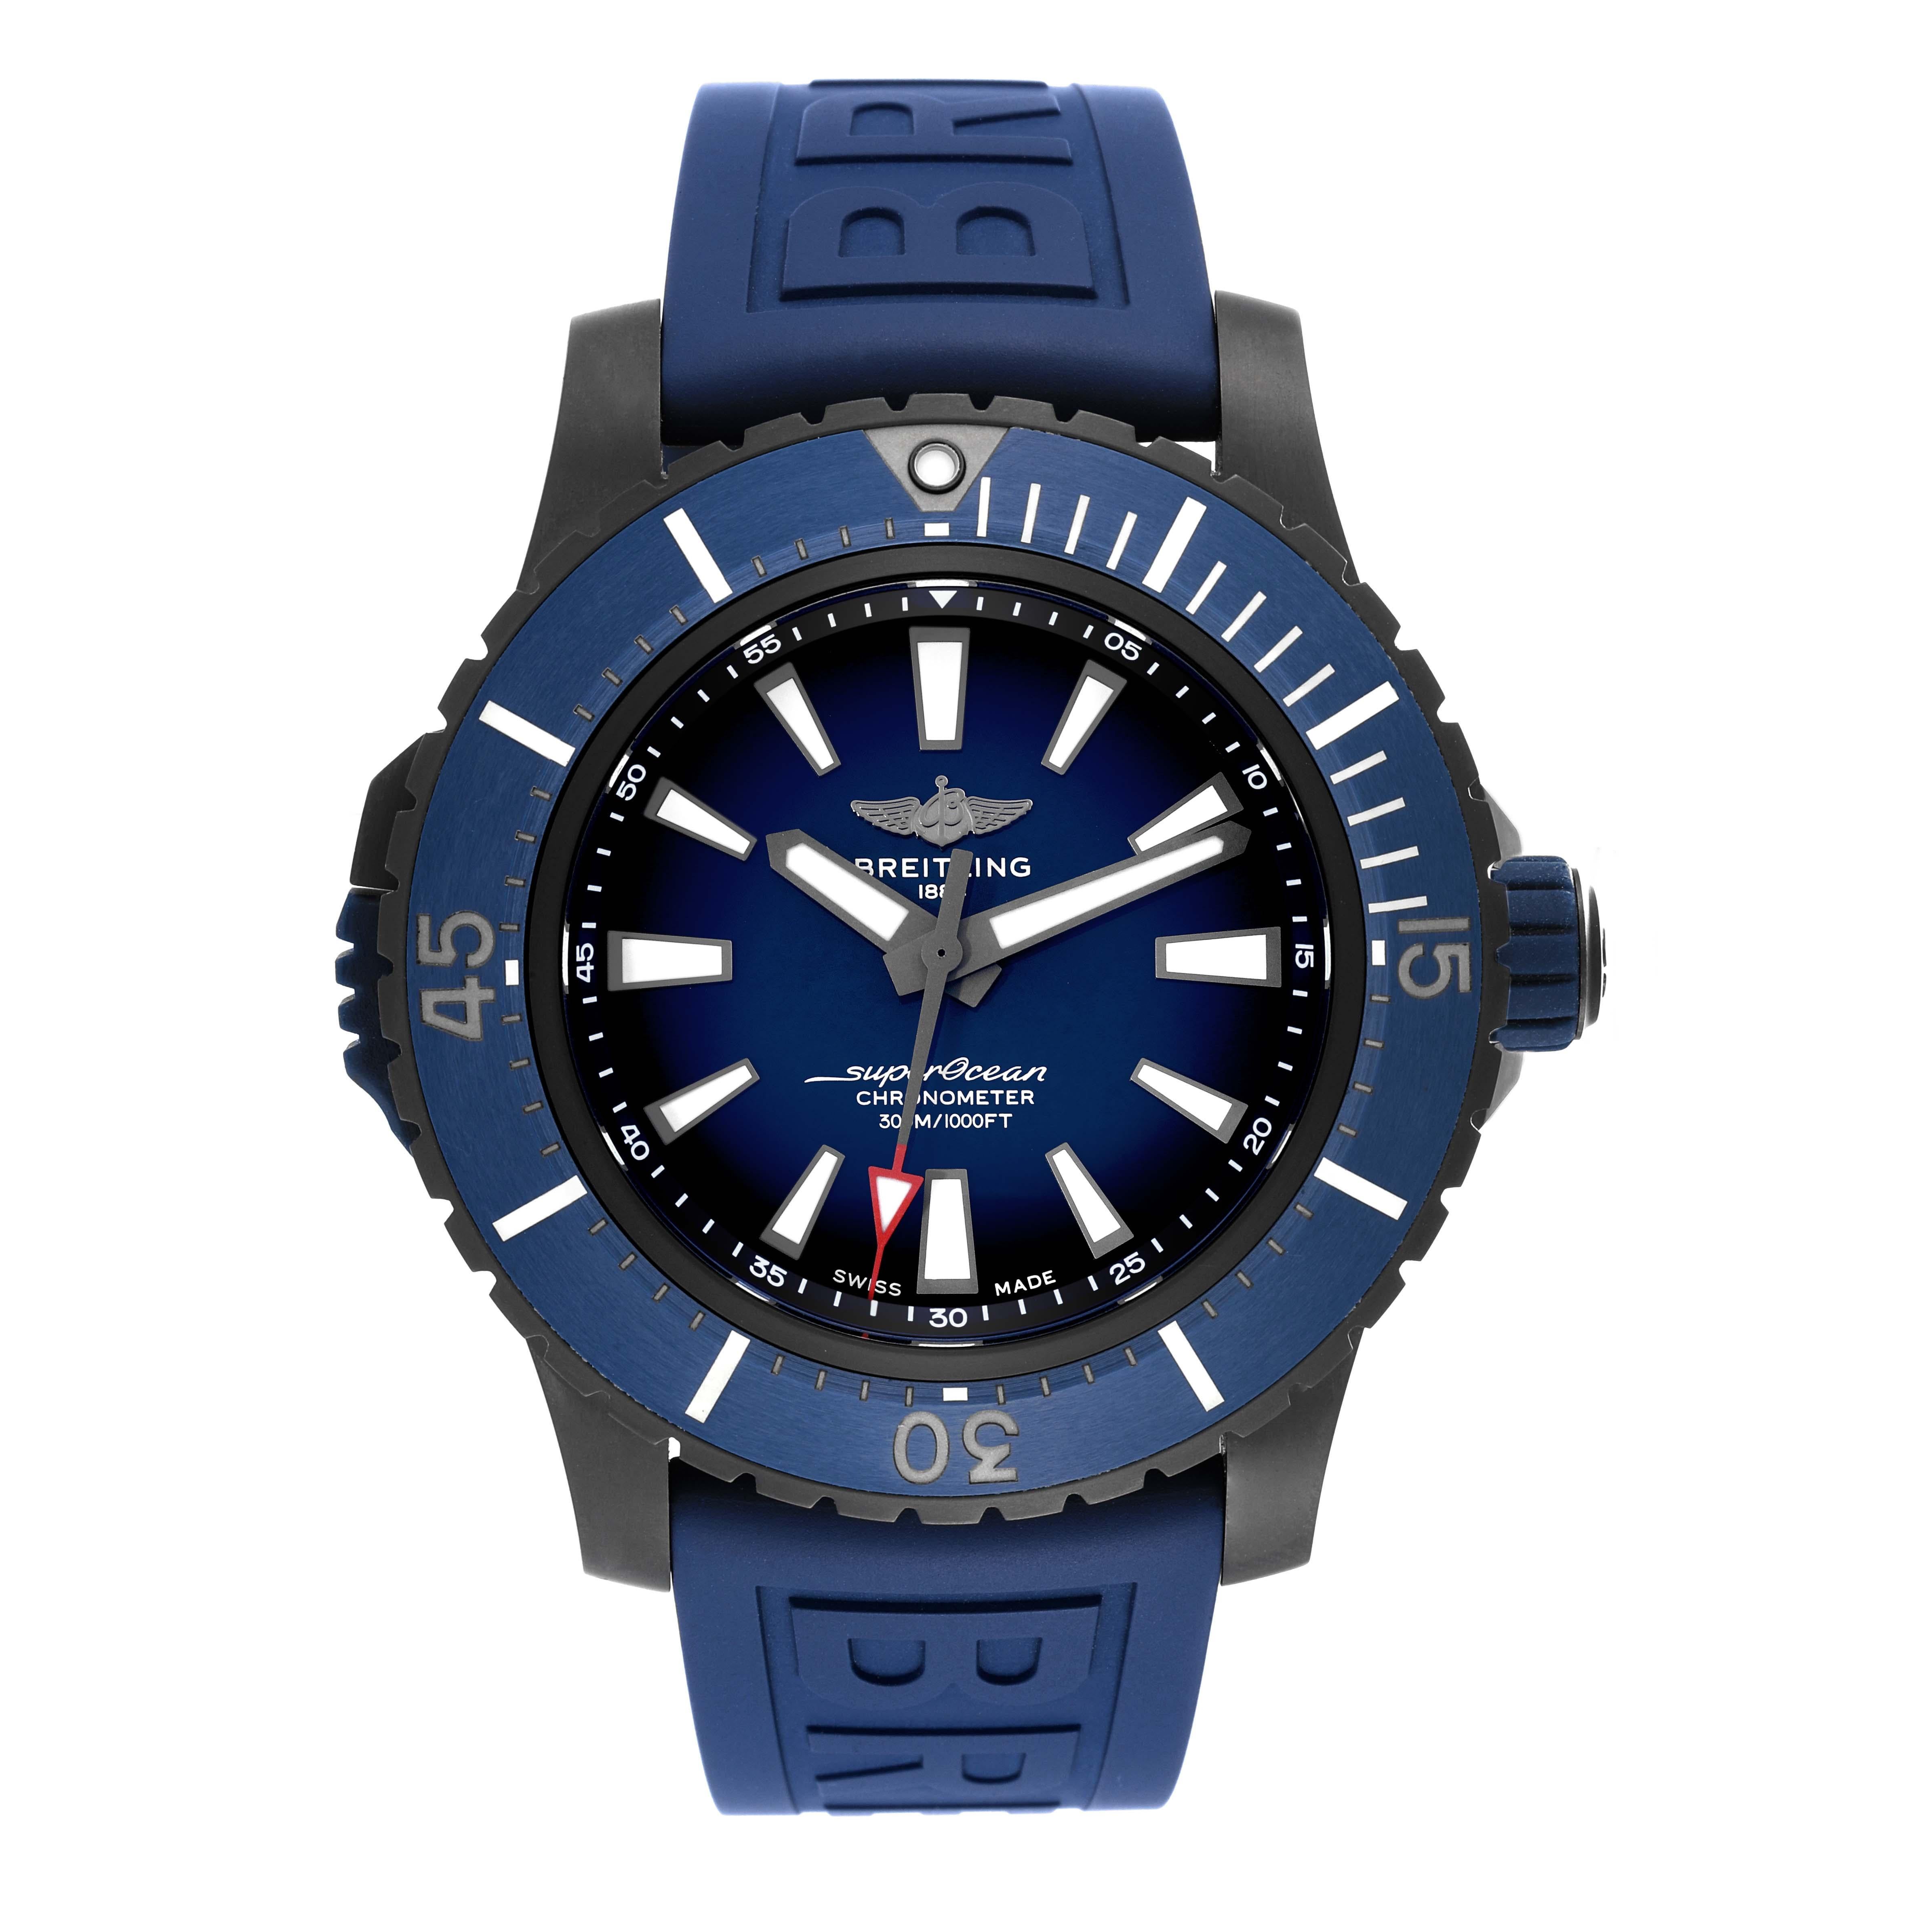 Breitling Superocean 48 Blue Dial Titanium Mens Watch V17369 Box Card. Automatic self-winding movement. DLC coated titanium case 48.0 mm in diameter. Rubberized screw down crown. DLC Coated Titanium bidirectional rotating bezel with locking